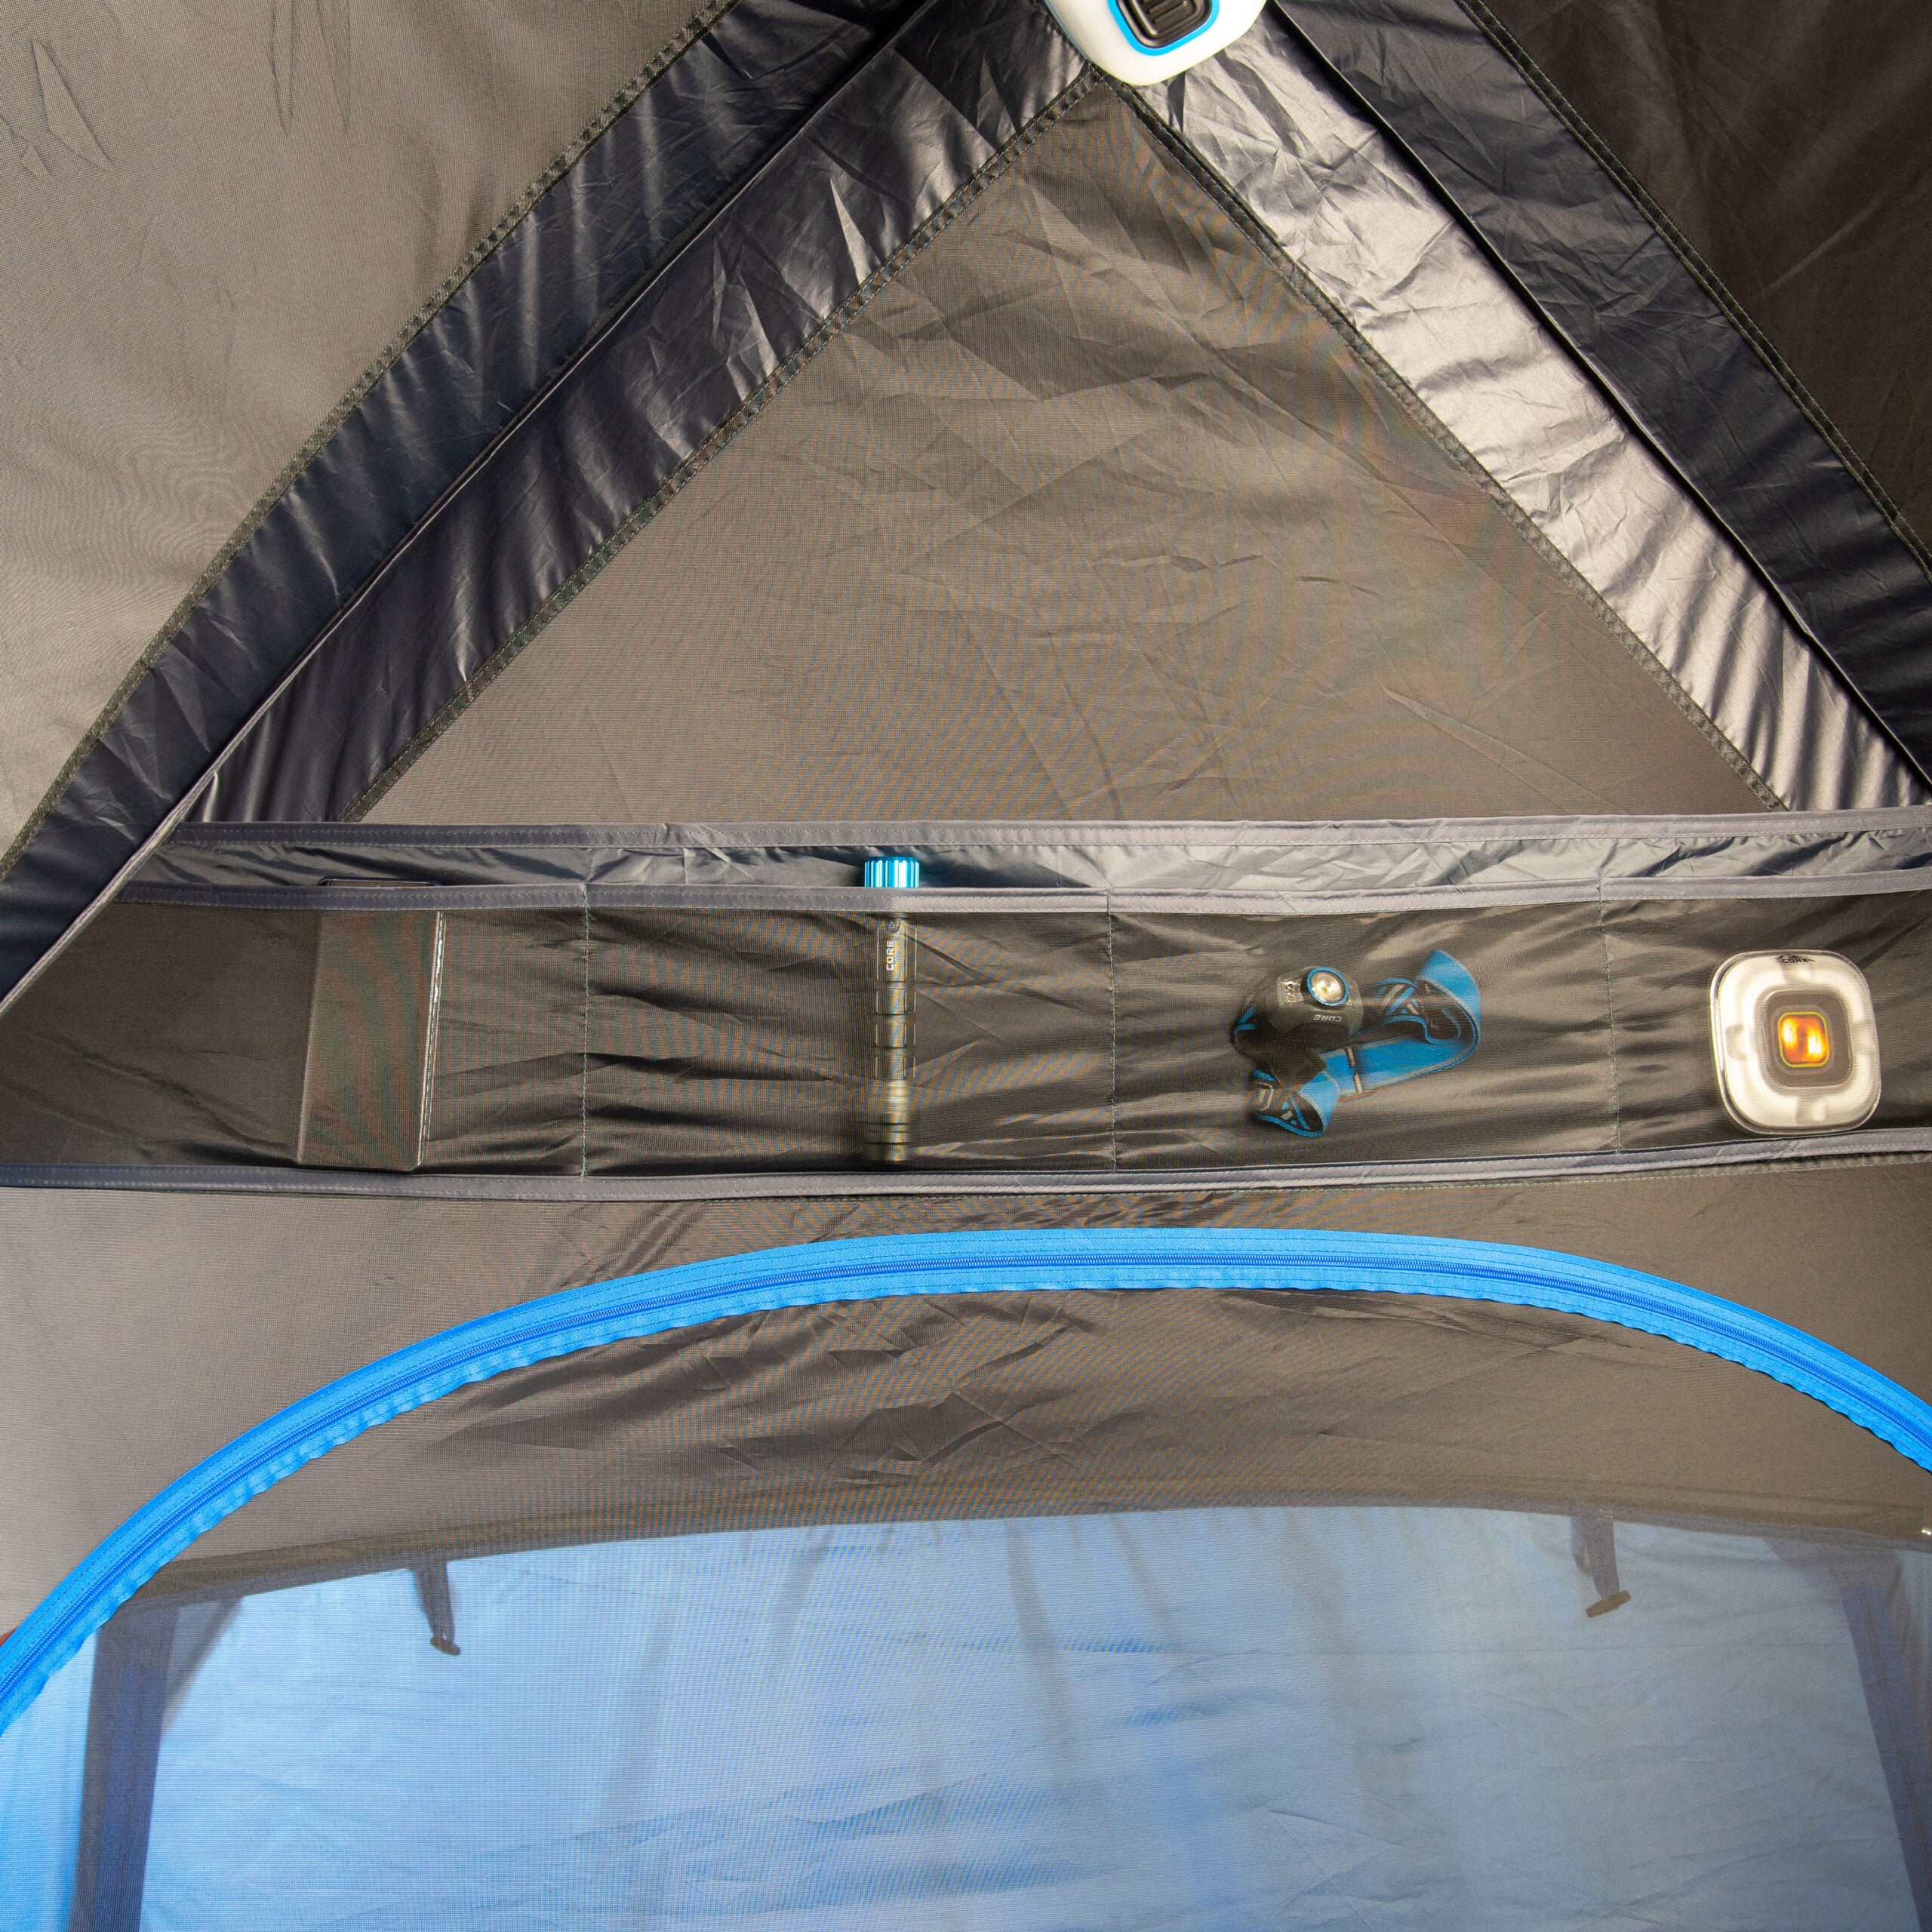 Quest Outdoors Dome 4